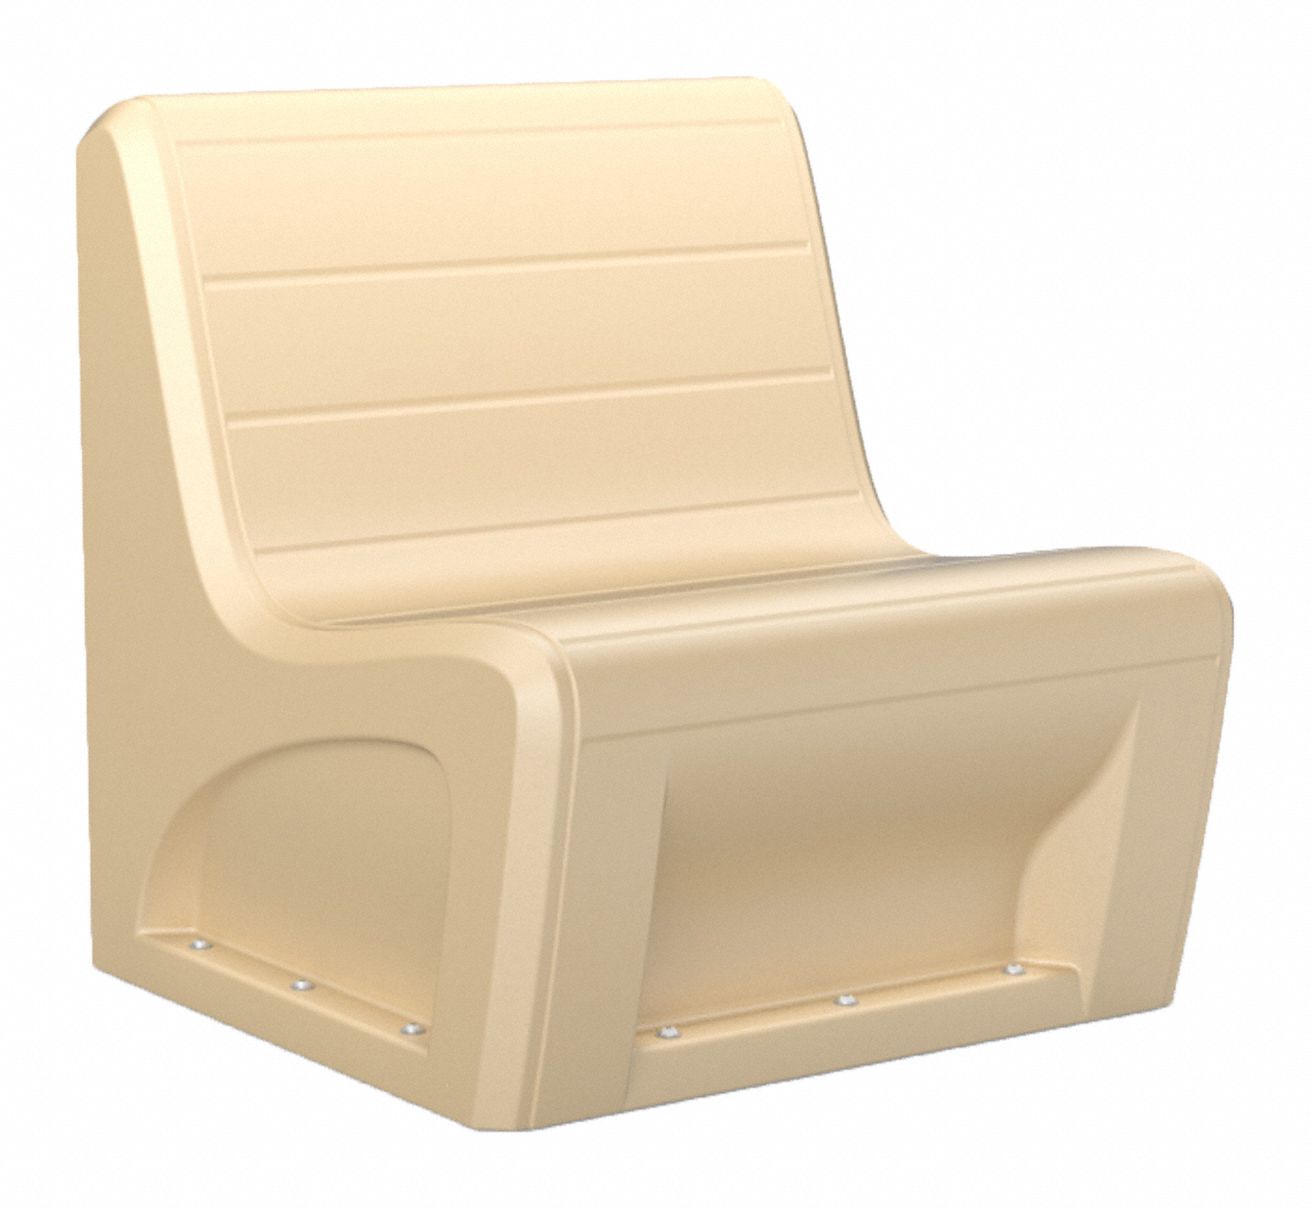 Sabre Sectional Chair w/Sand Port Sand: 30 1/2 in Wd, 32 in Lg, 33 in Ht, 500 lb Wt Capacity